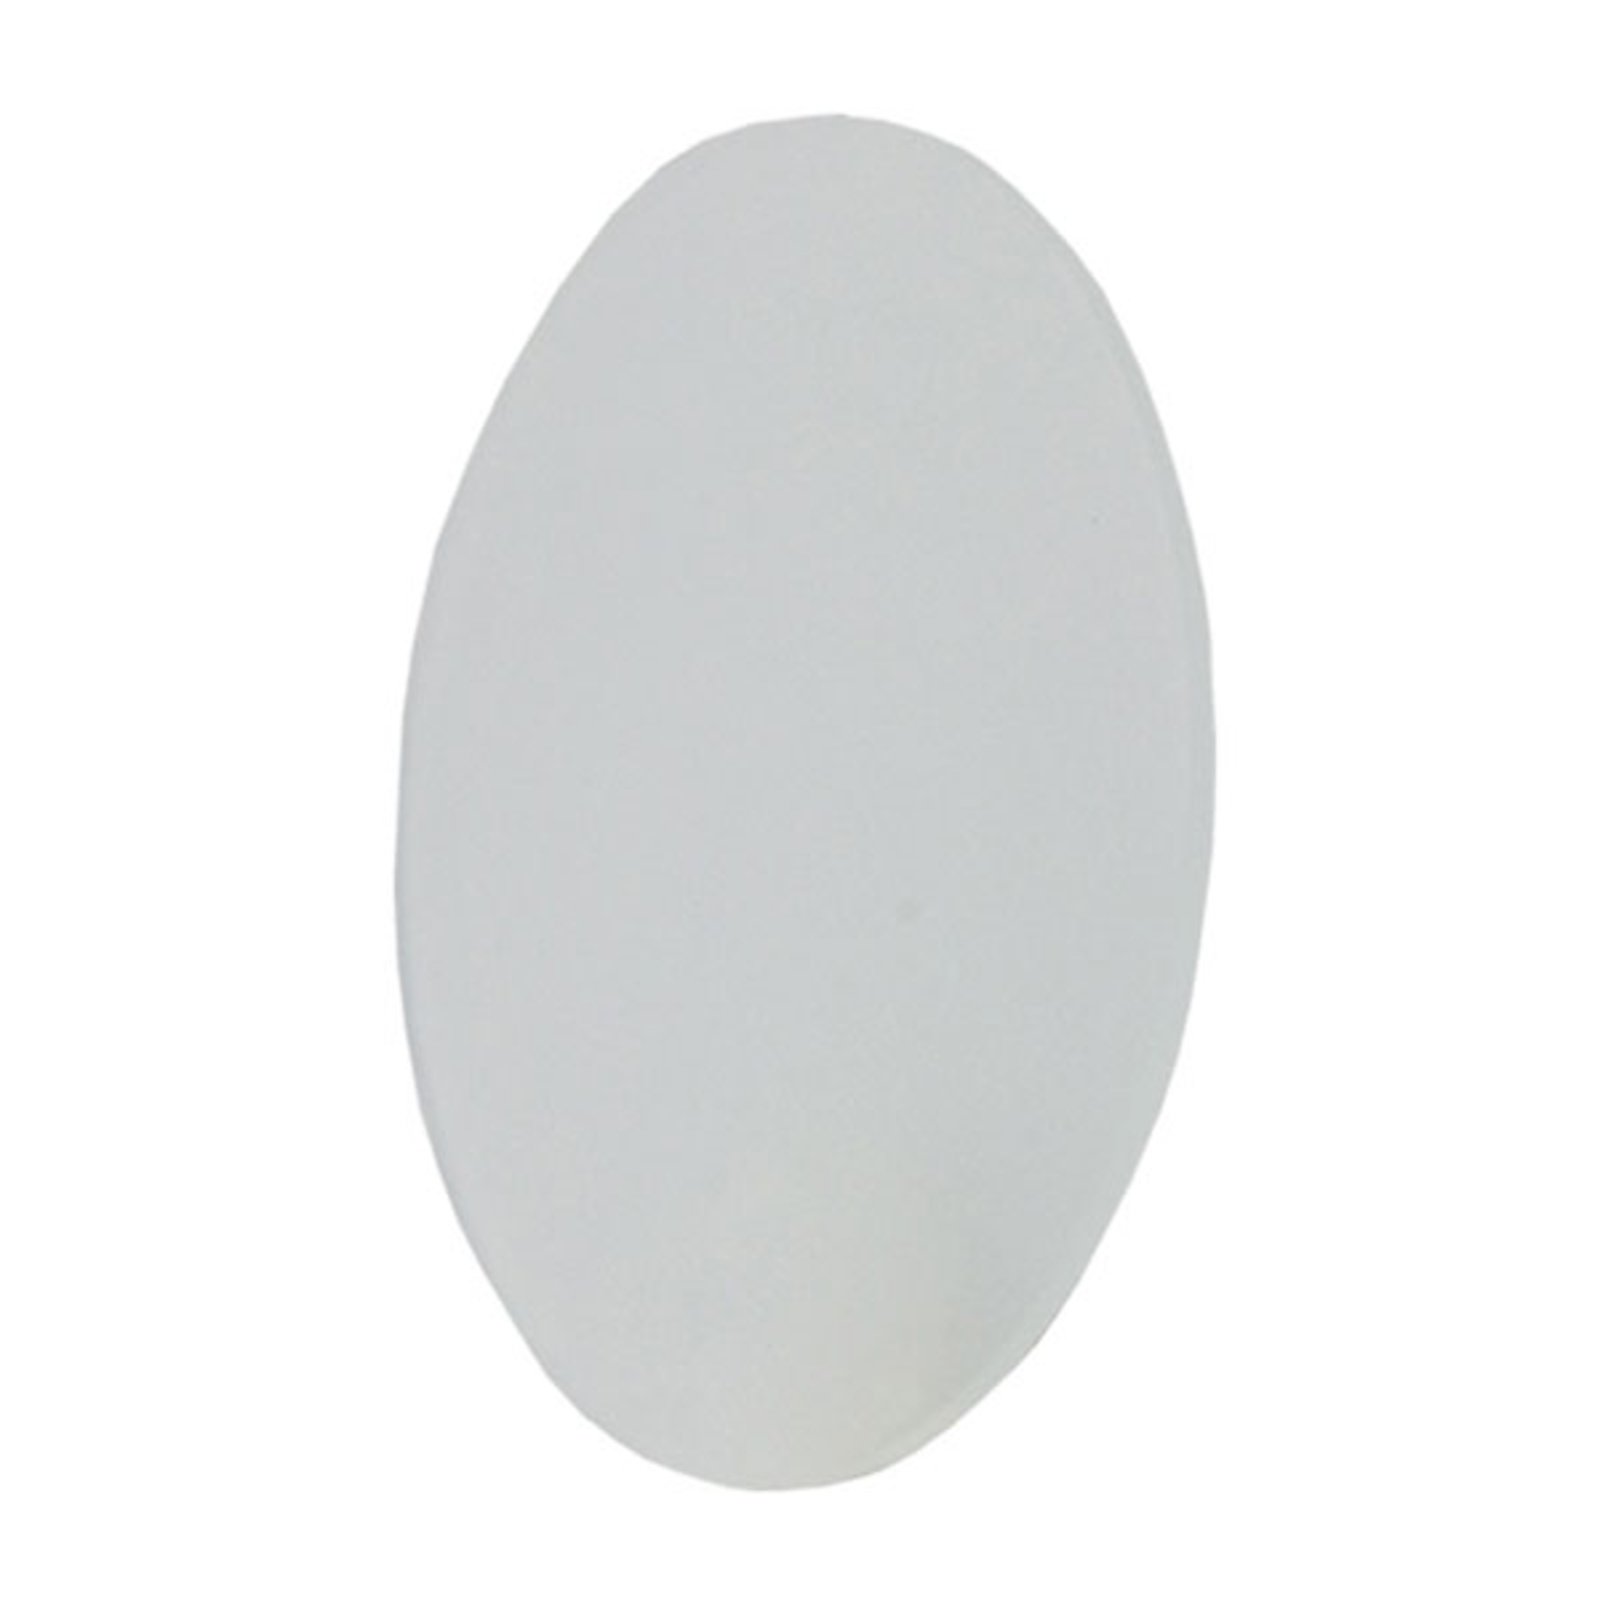 Frosted glass for the Puk Meg Maxx luminaire series